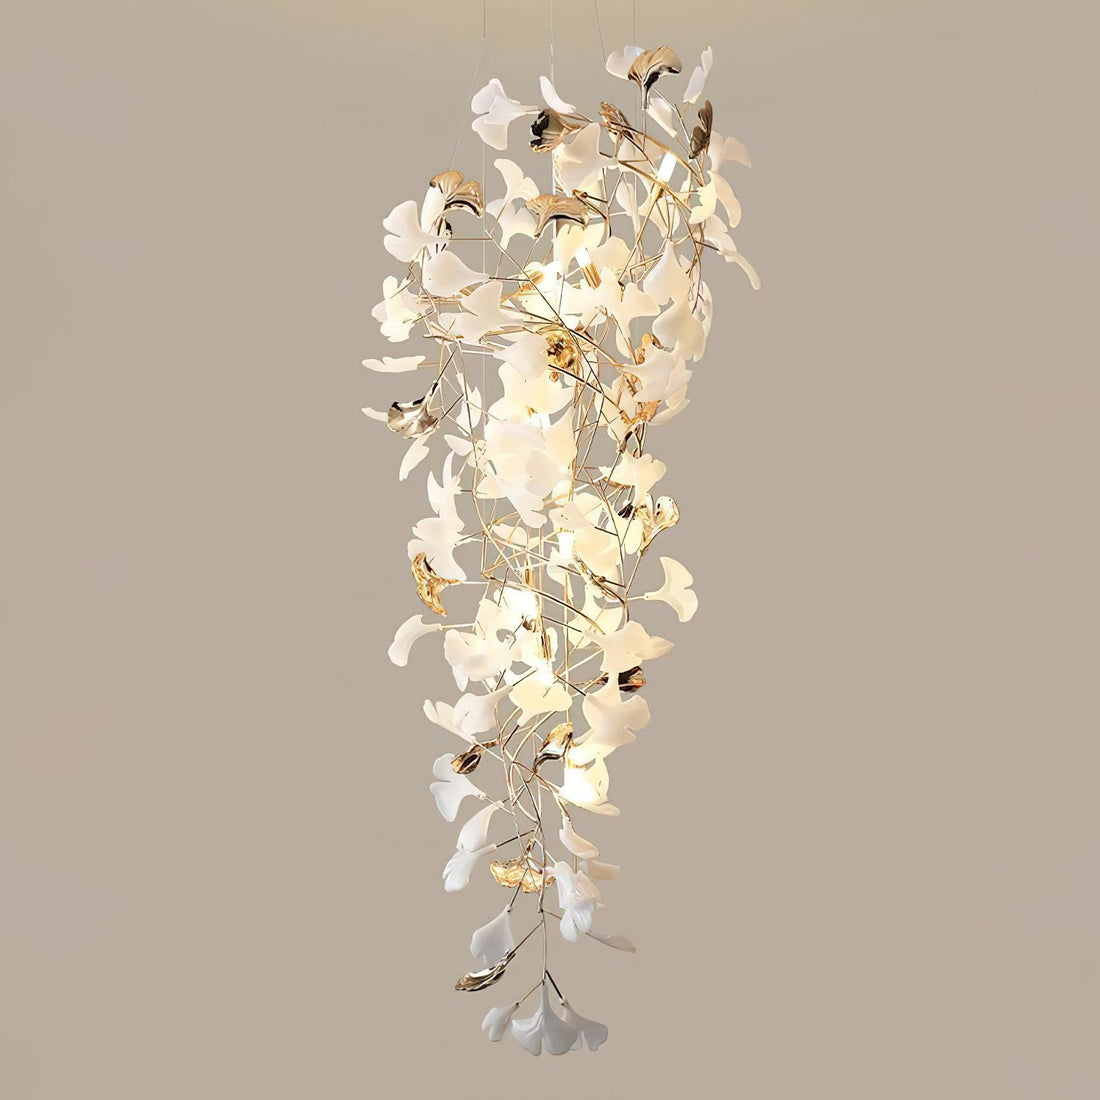 Gingko chandelier with Long Branch